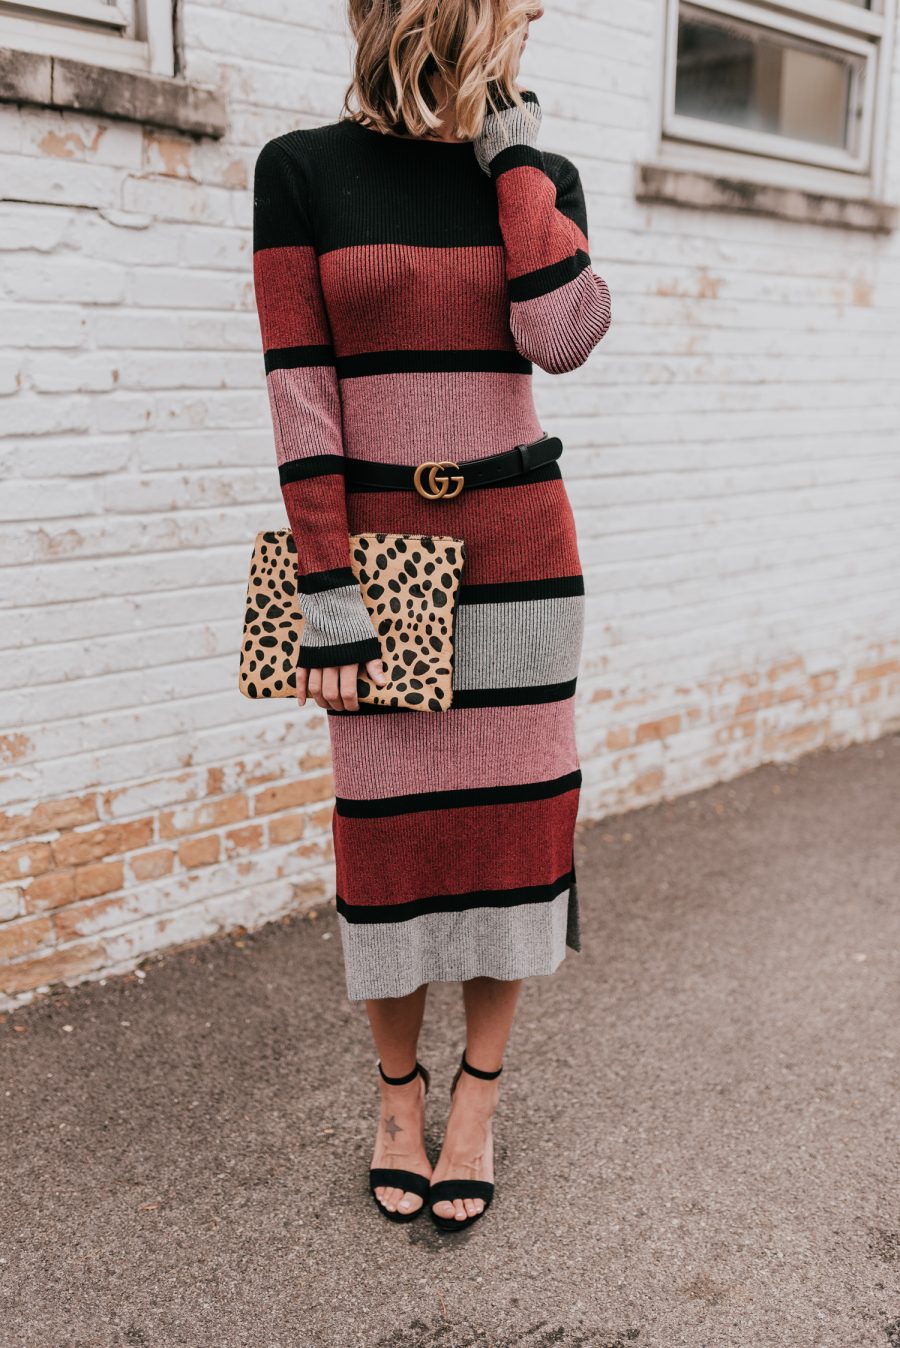 Striped dress: holiday party